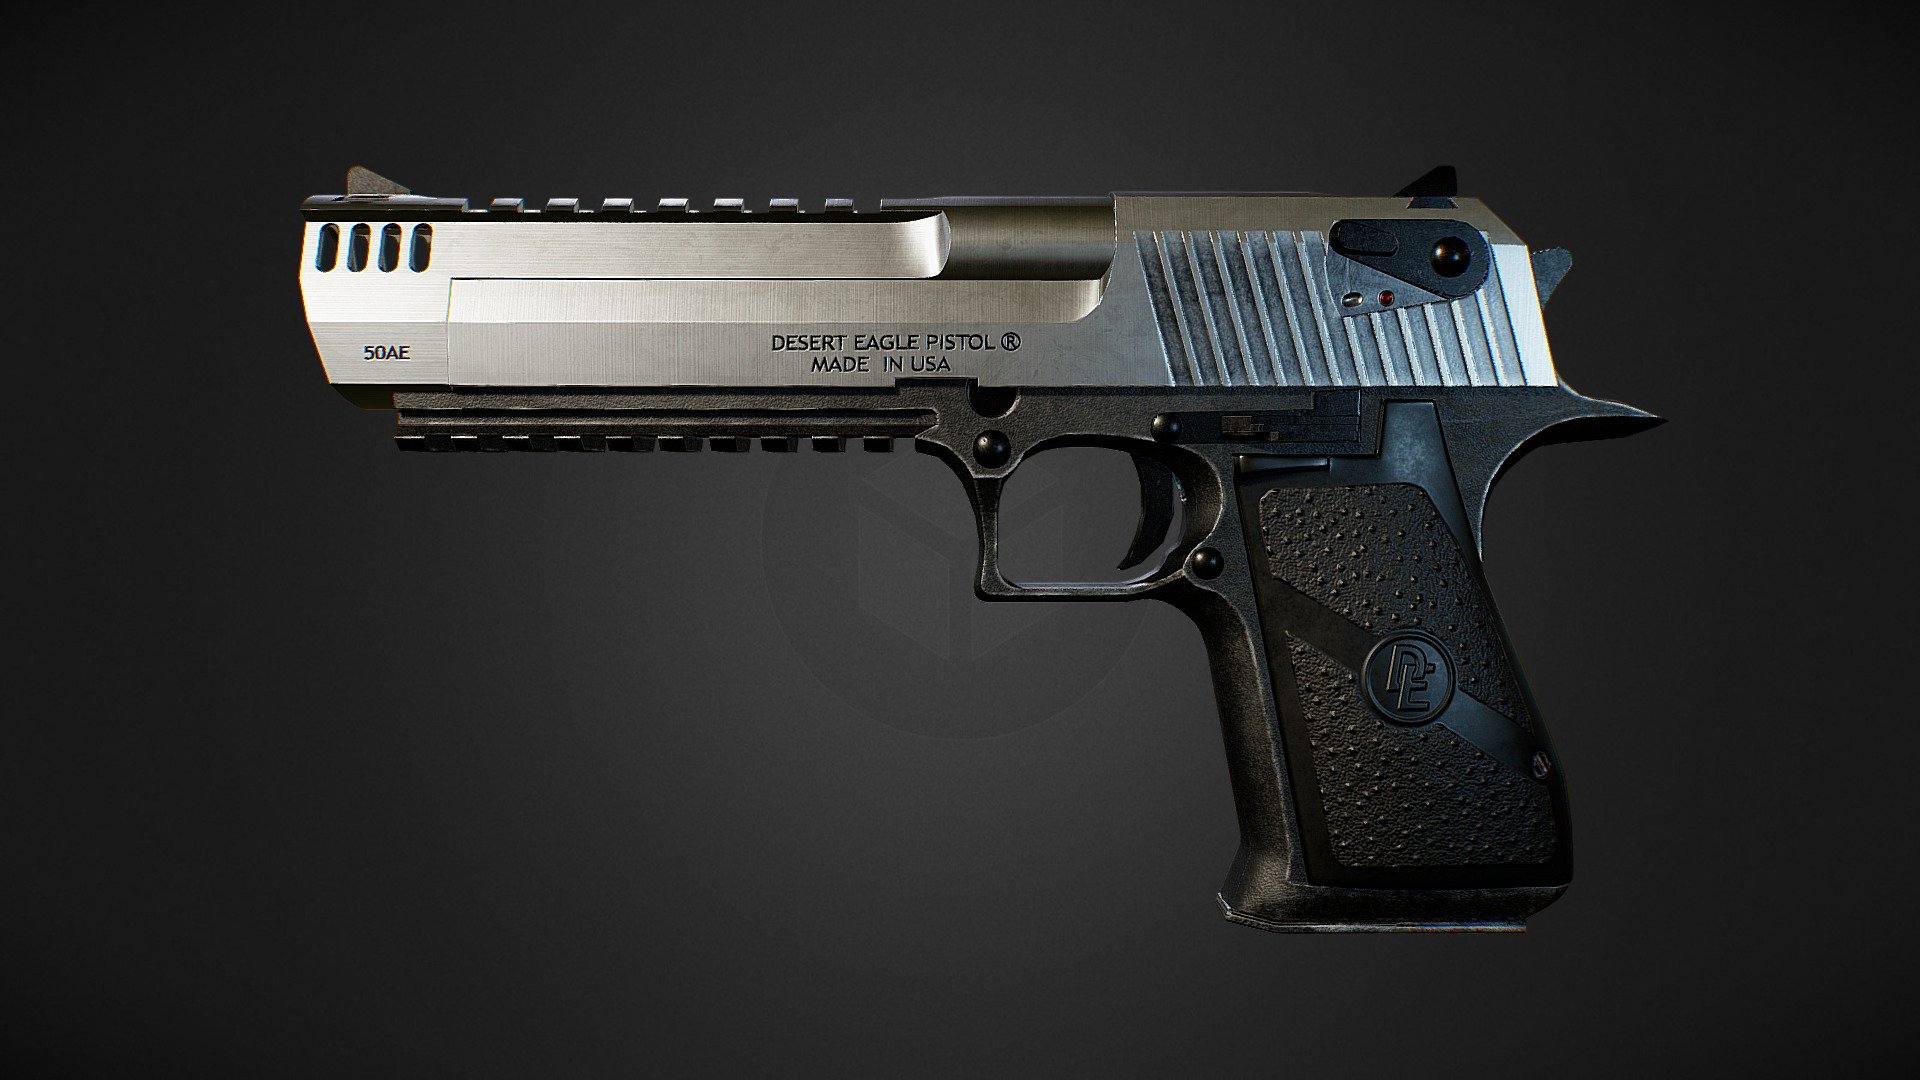 4k PBR textures. 
Low poly, but its only a shell, doesn't have any insides, or a removable ammunition clip 3d model